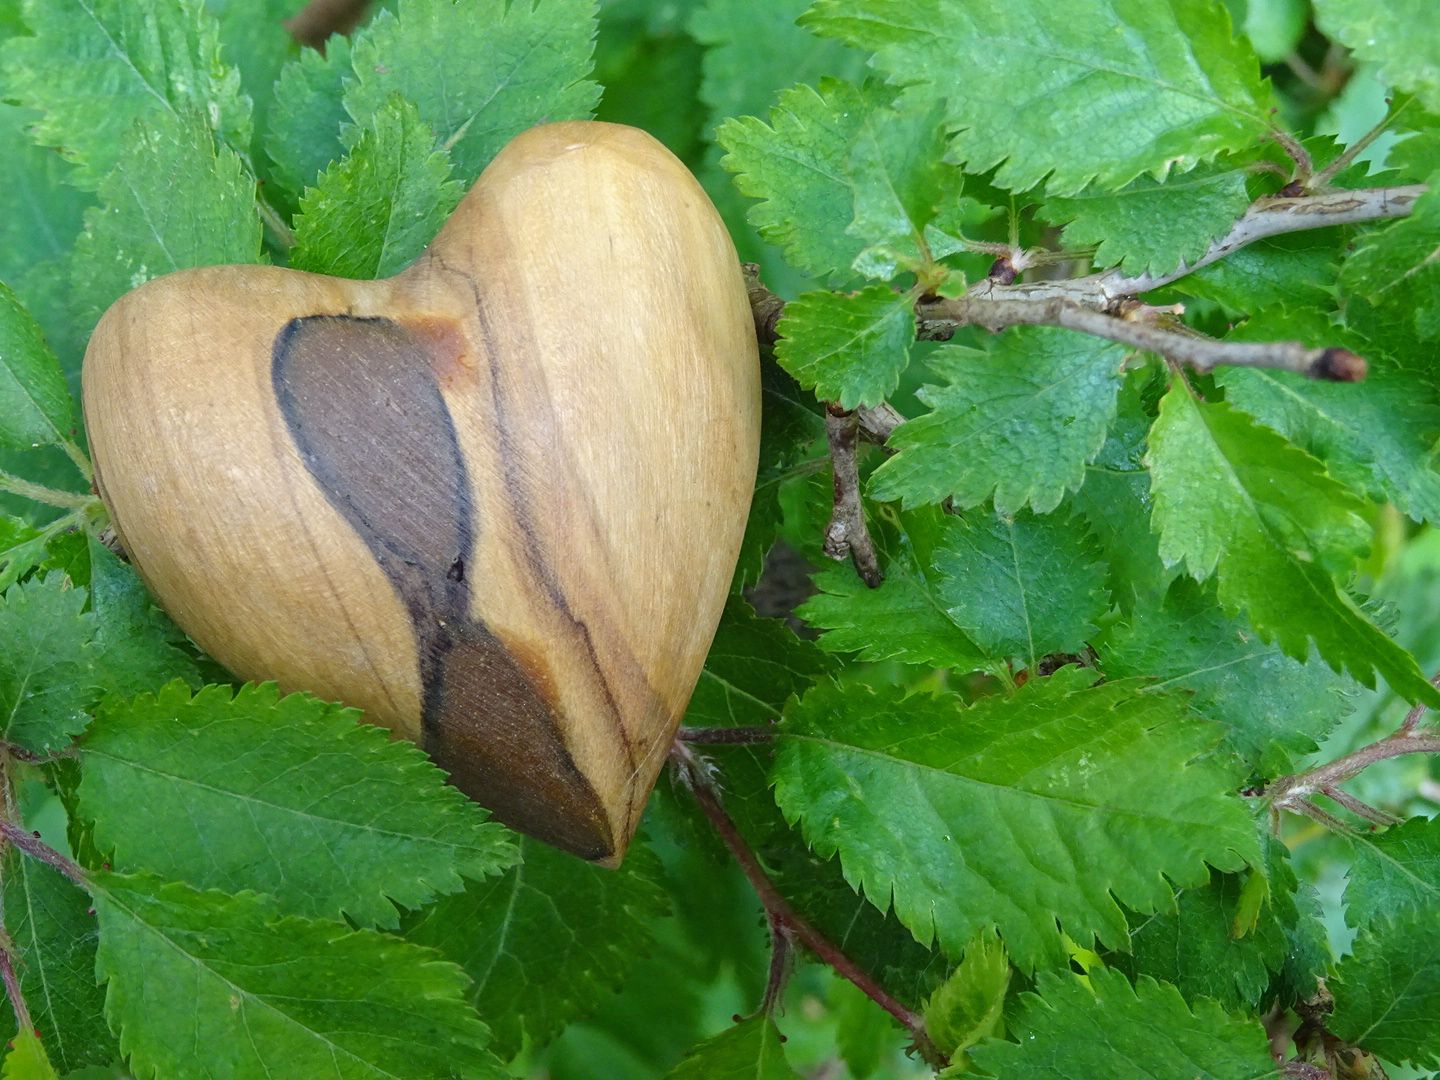 A heart made from olive wood rests on the leaves of a small tree